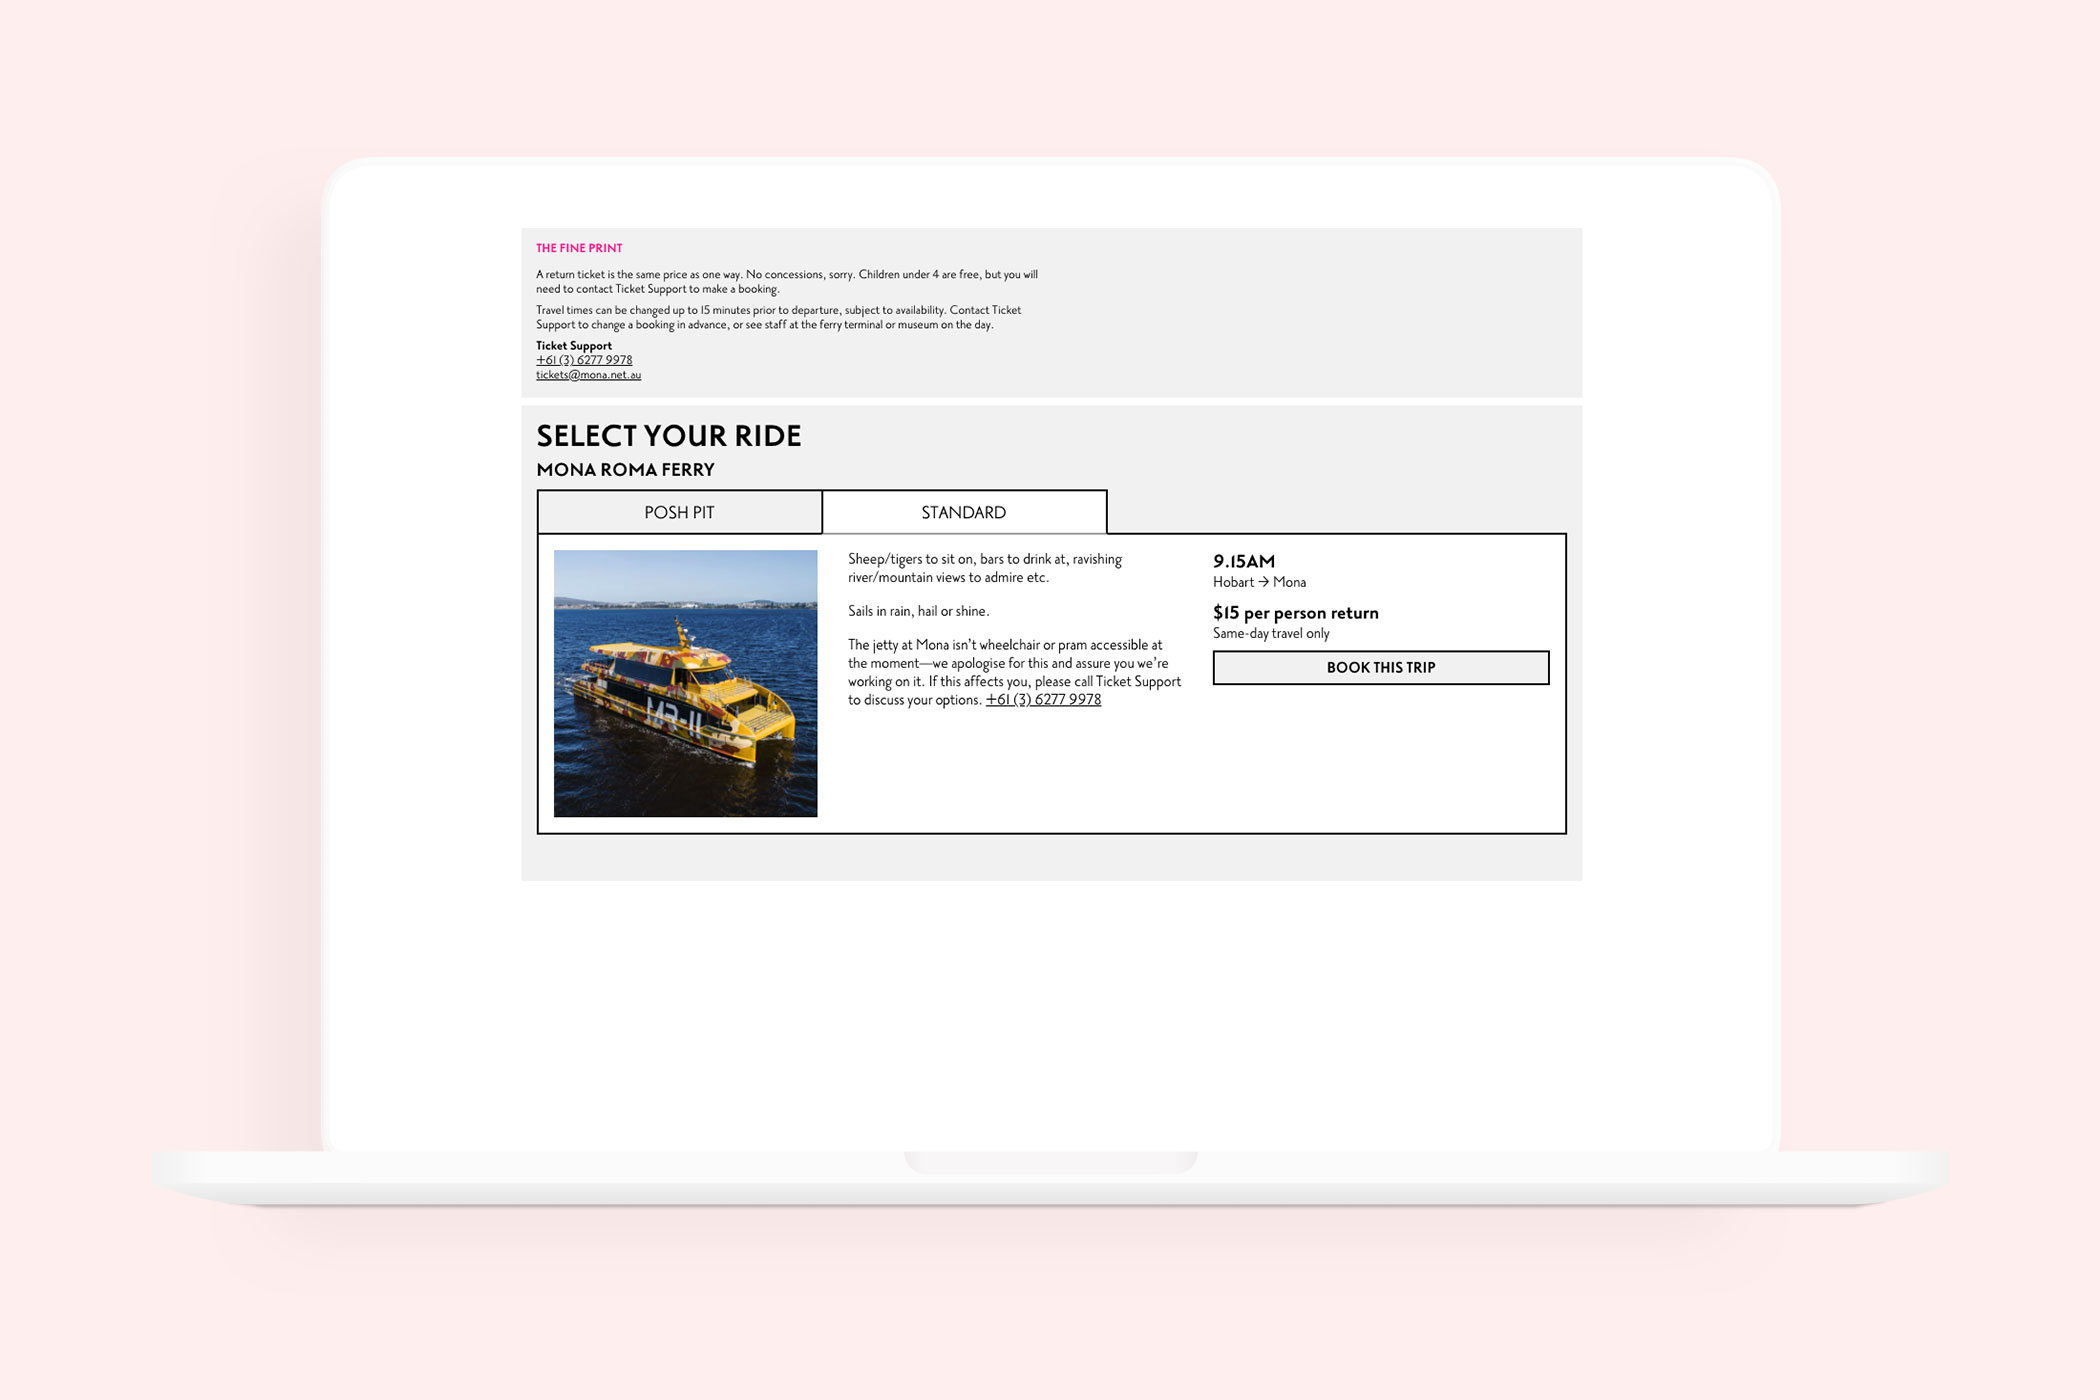 A screenshot of the MONA website showing the options for booking the Ferry that goes from Hobart to the museum.